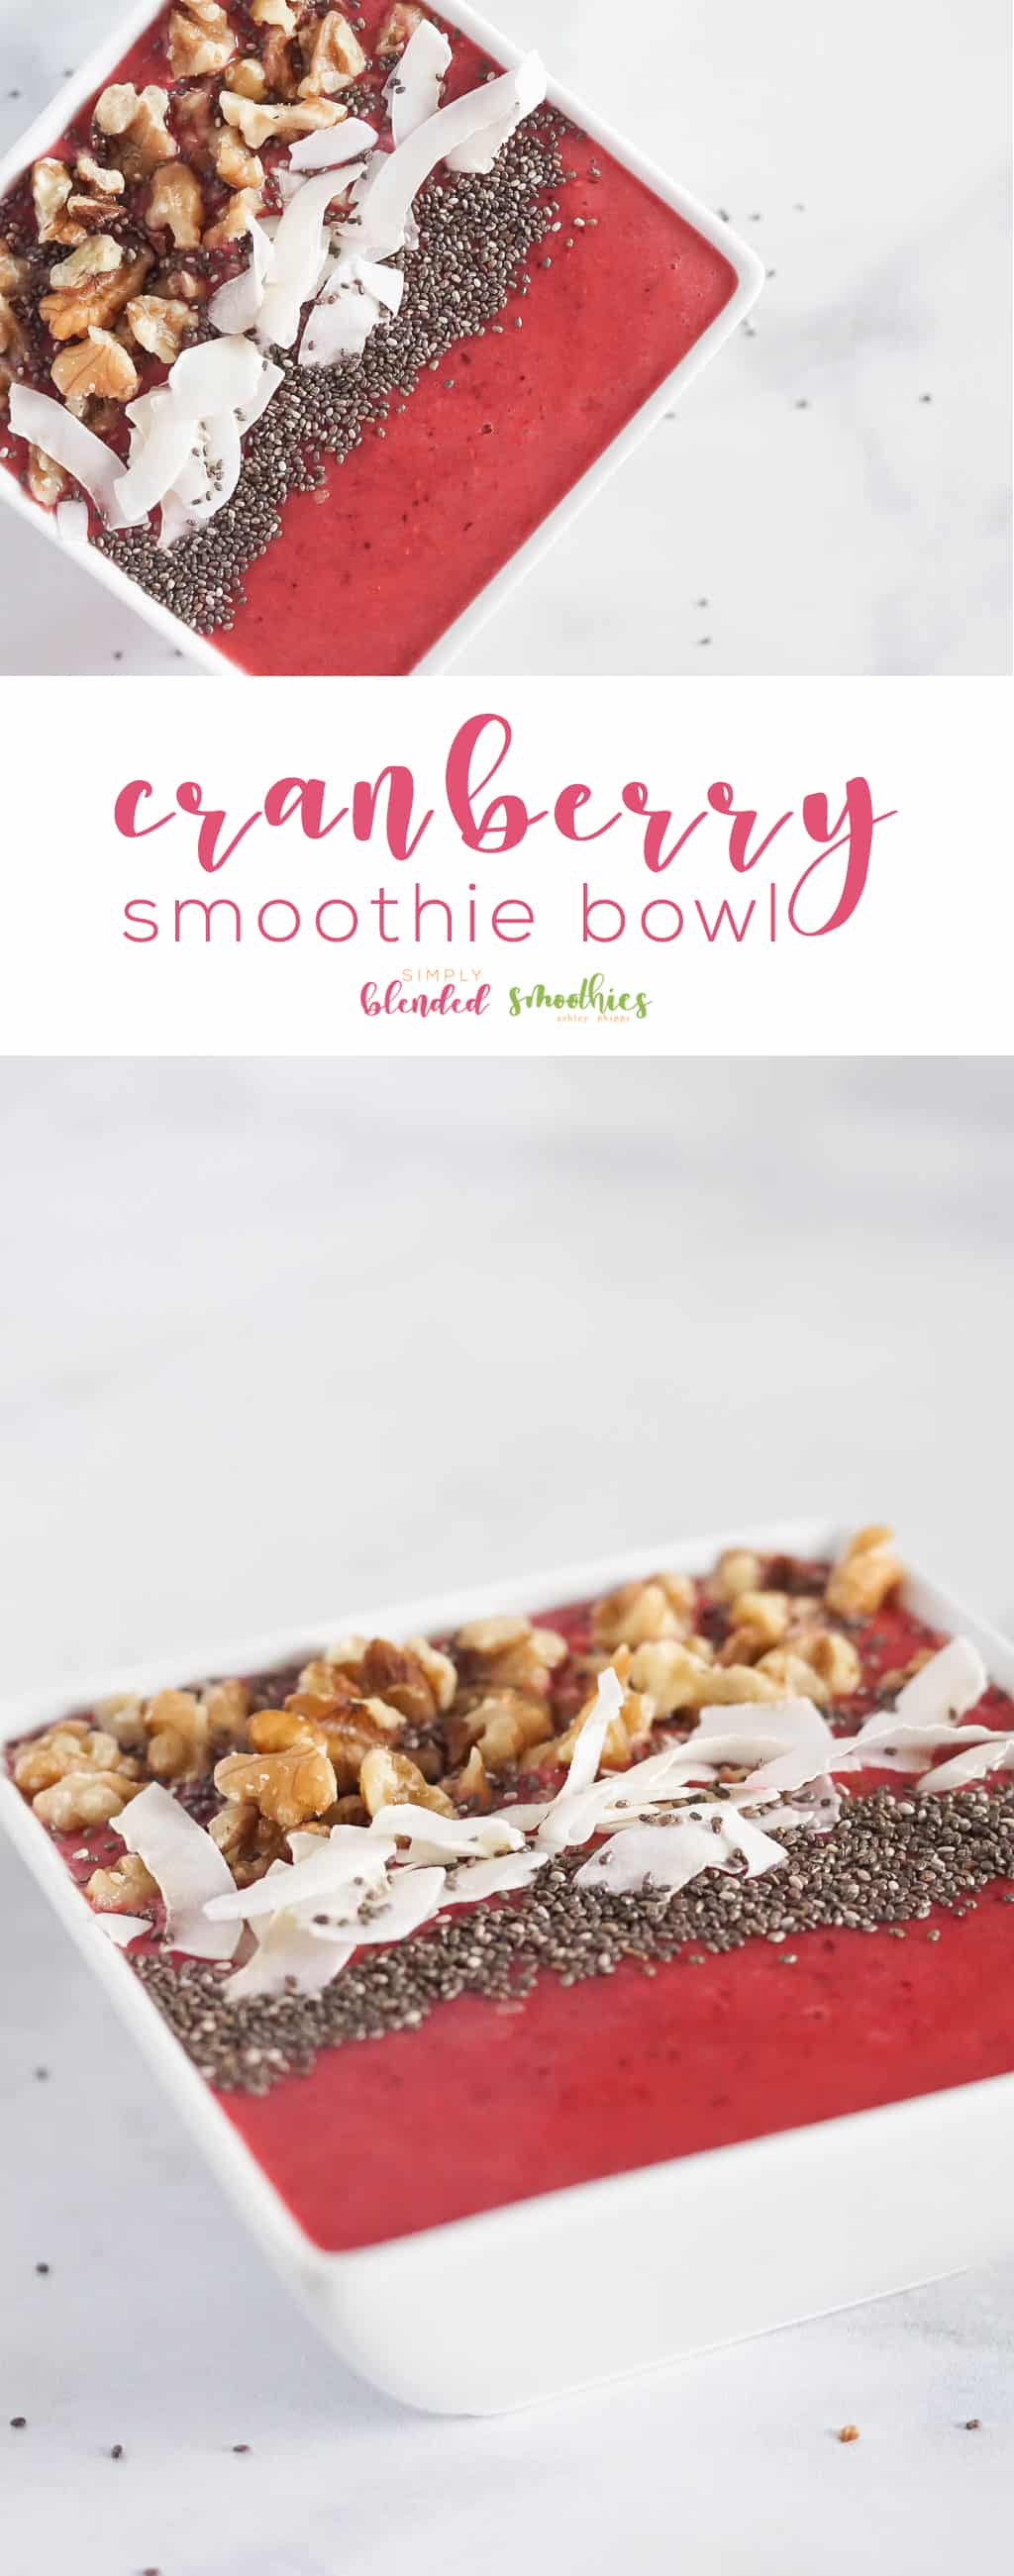 Cranberry Smoothie Bowl Recipe - A Simple And Healthy Smoothie That Is Sure To Fill You Up